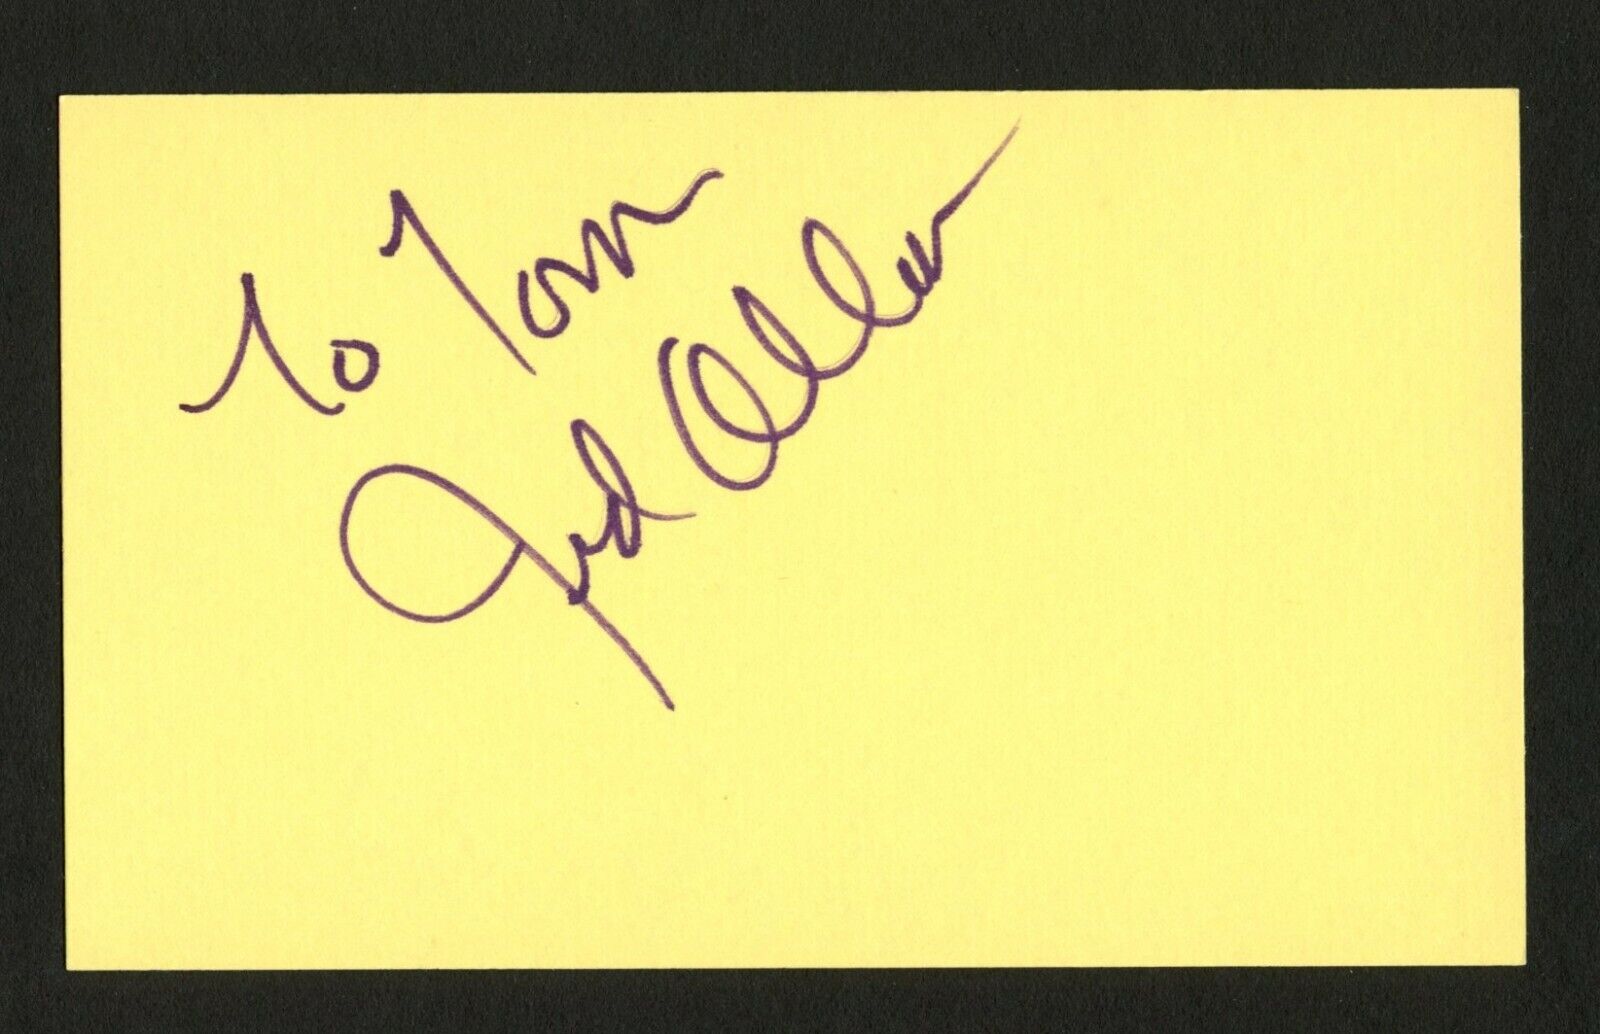 Jed Allan d.2019 signed autograph 3x5 card Rush Sanders Beverly Hills 90210 C009